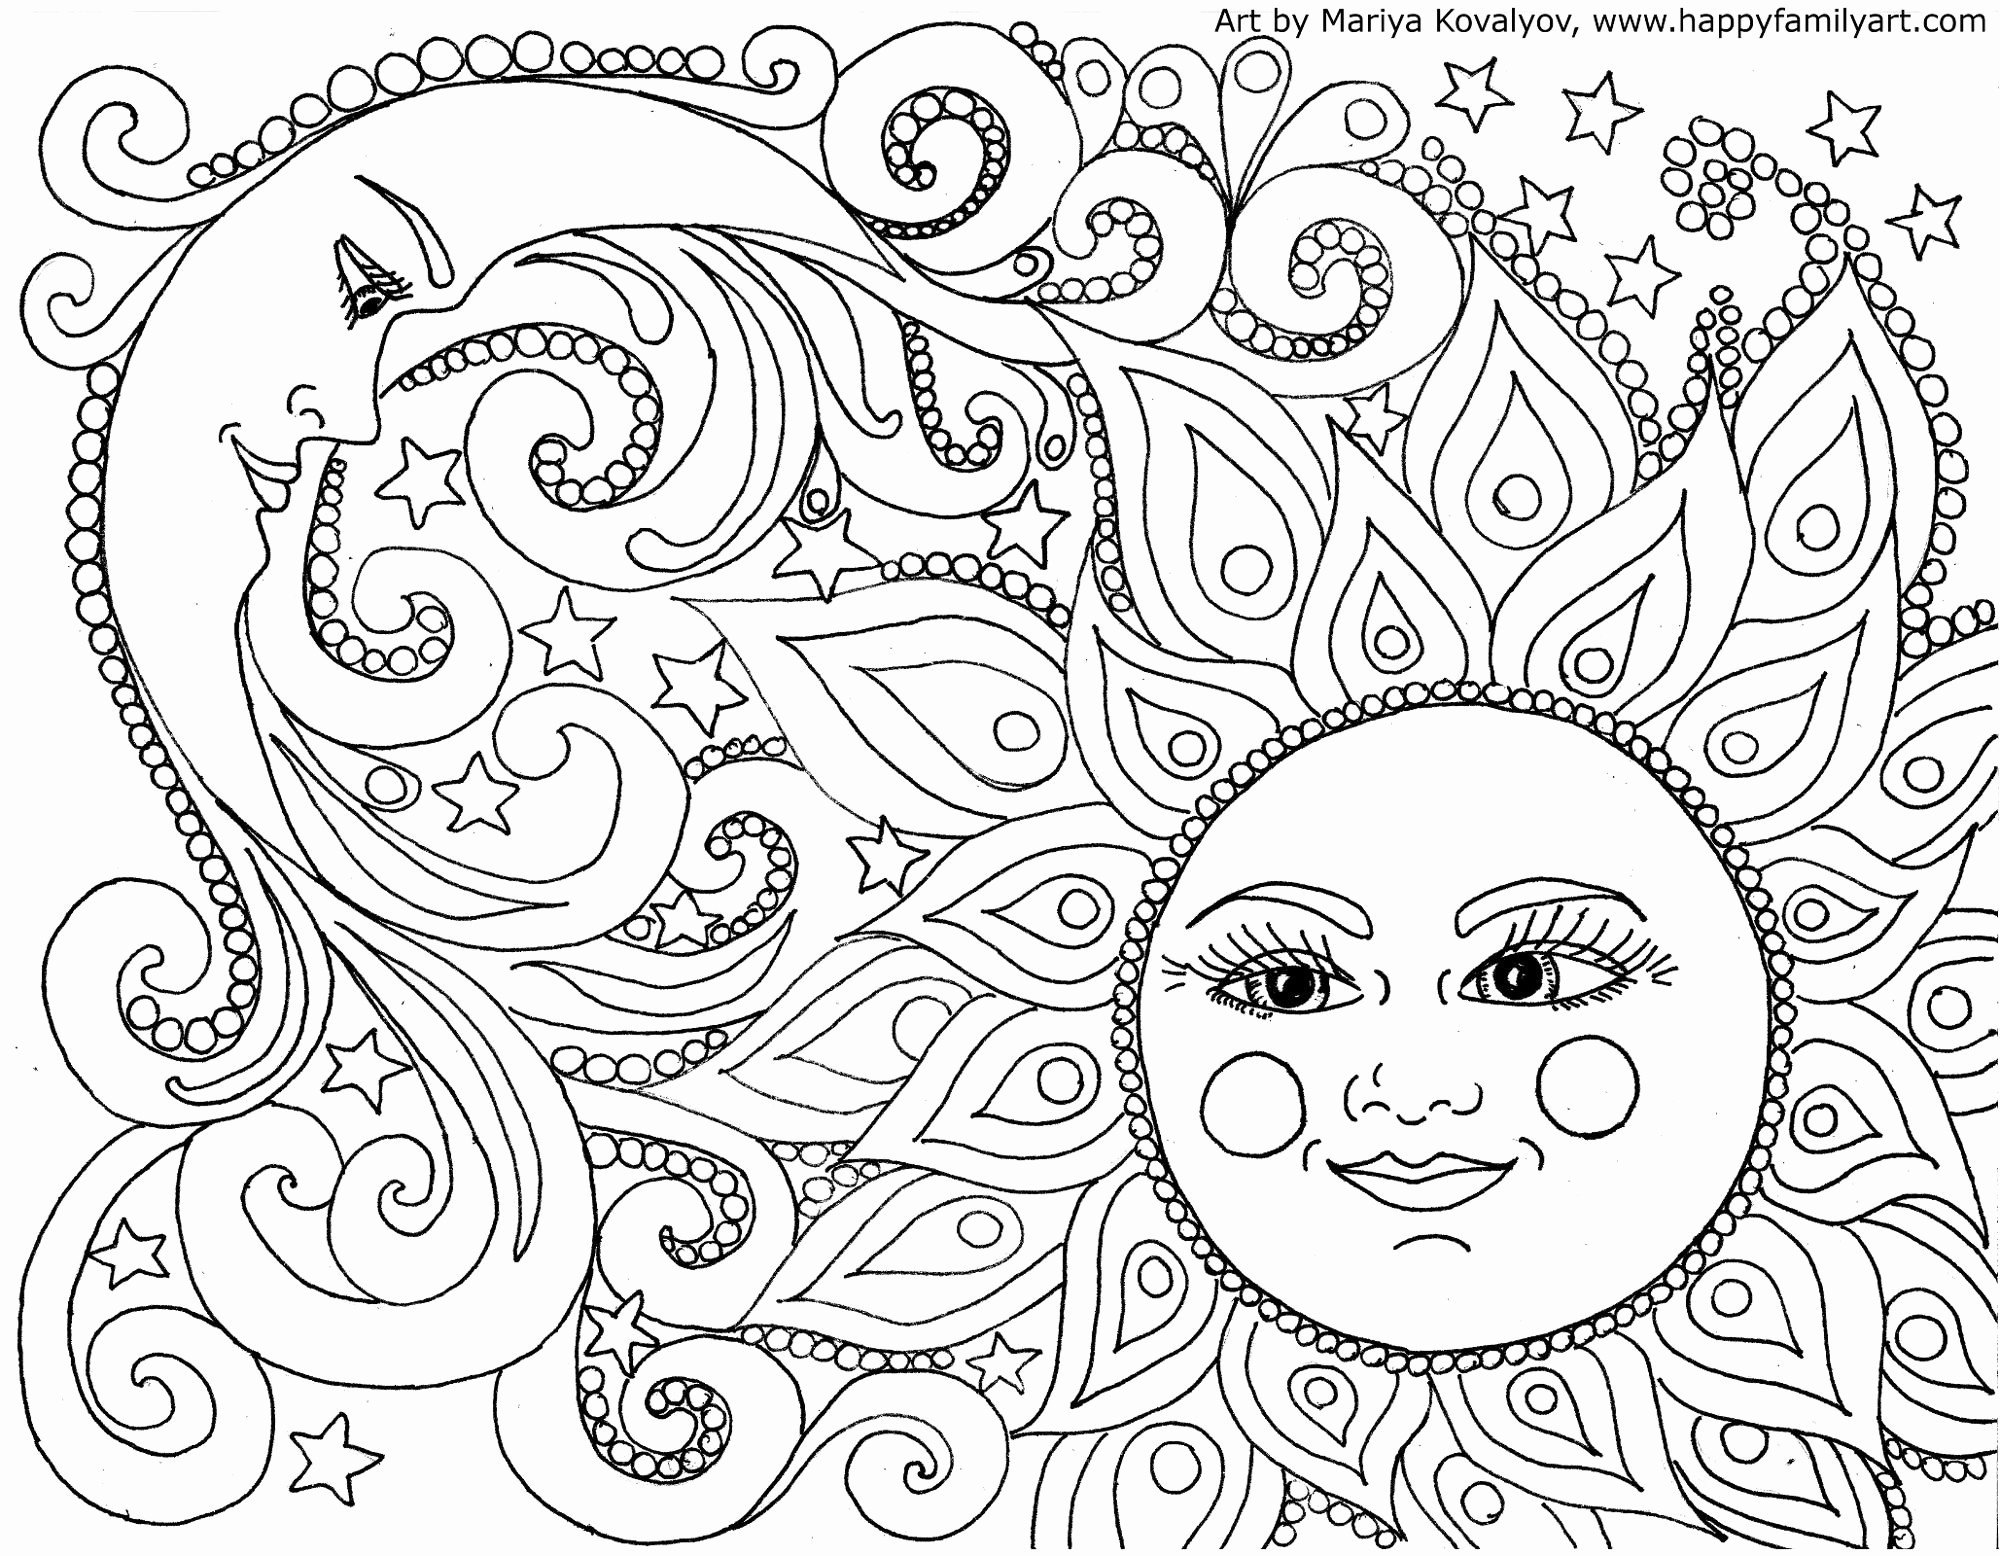 Coloring Pages : Free Printable Coloring Pages With Quotes Sun For - Free Printable Coloring Books For Adults